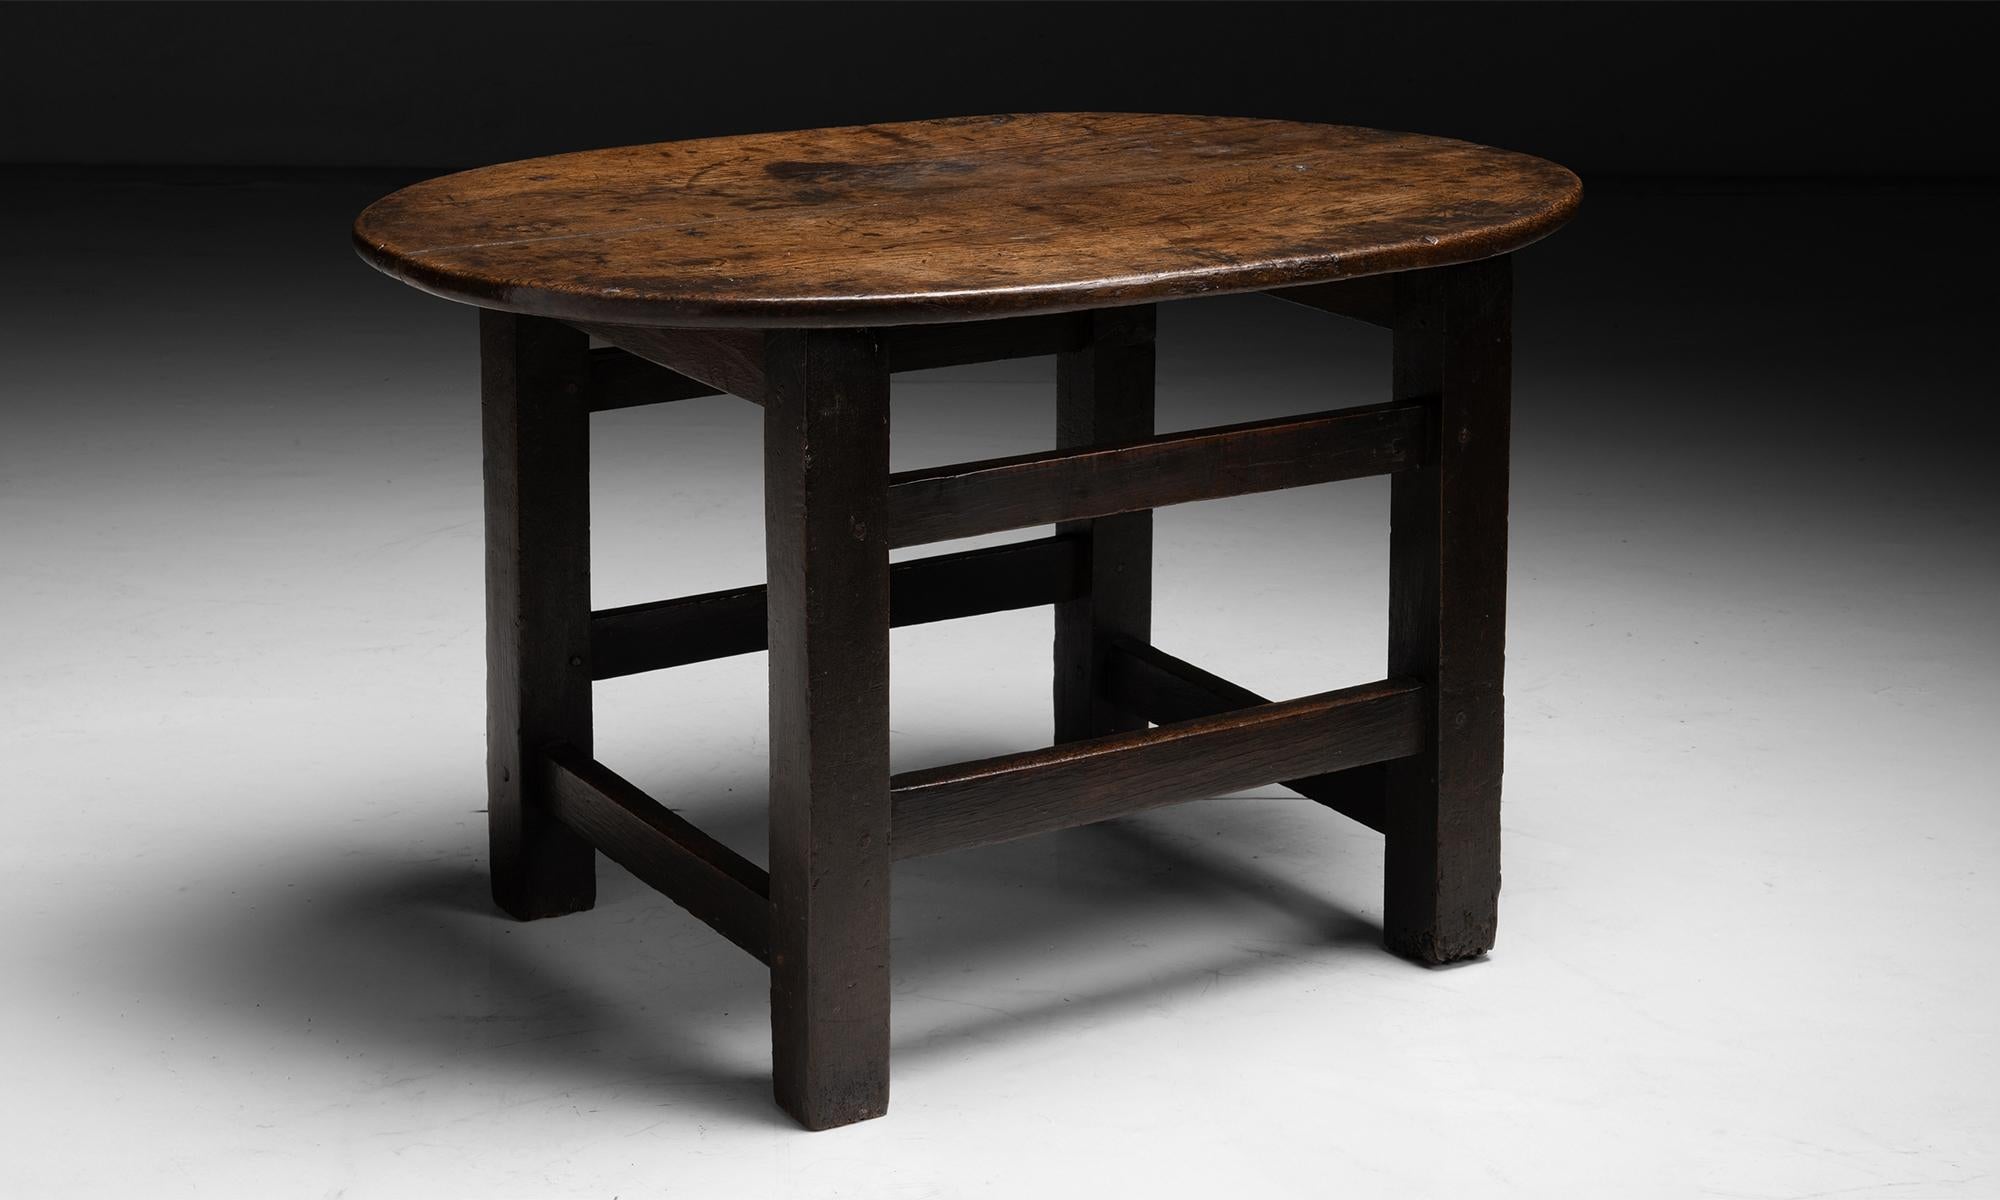 Westmorland Oak Low Table
England circa 1780

2 plank oval Top with support stretchers. Original stain and patina.

36.5”L x 25”d x 22.75”h